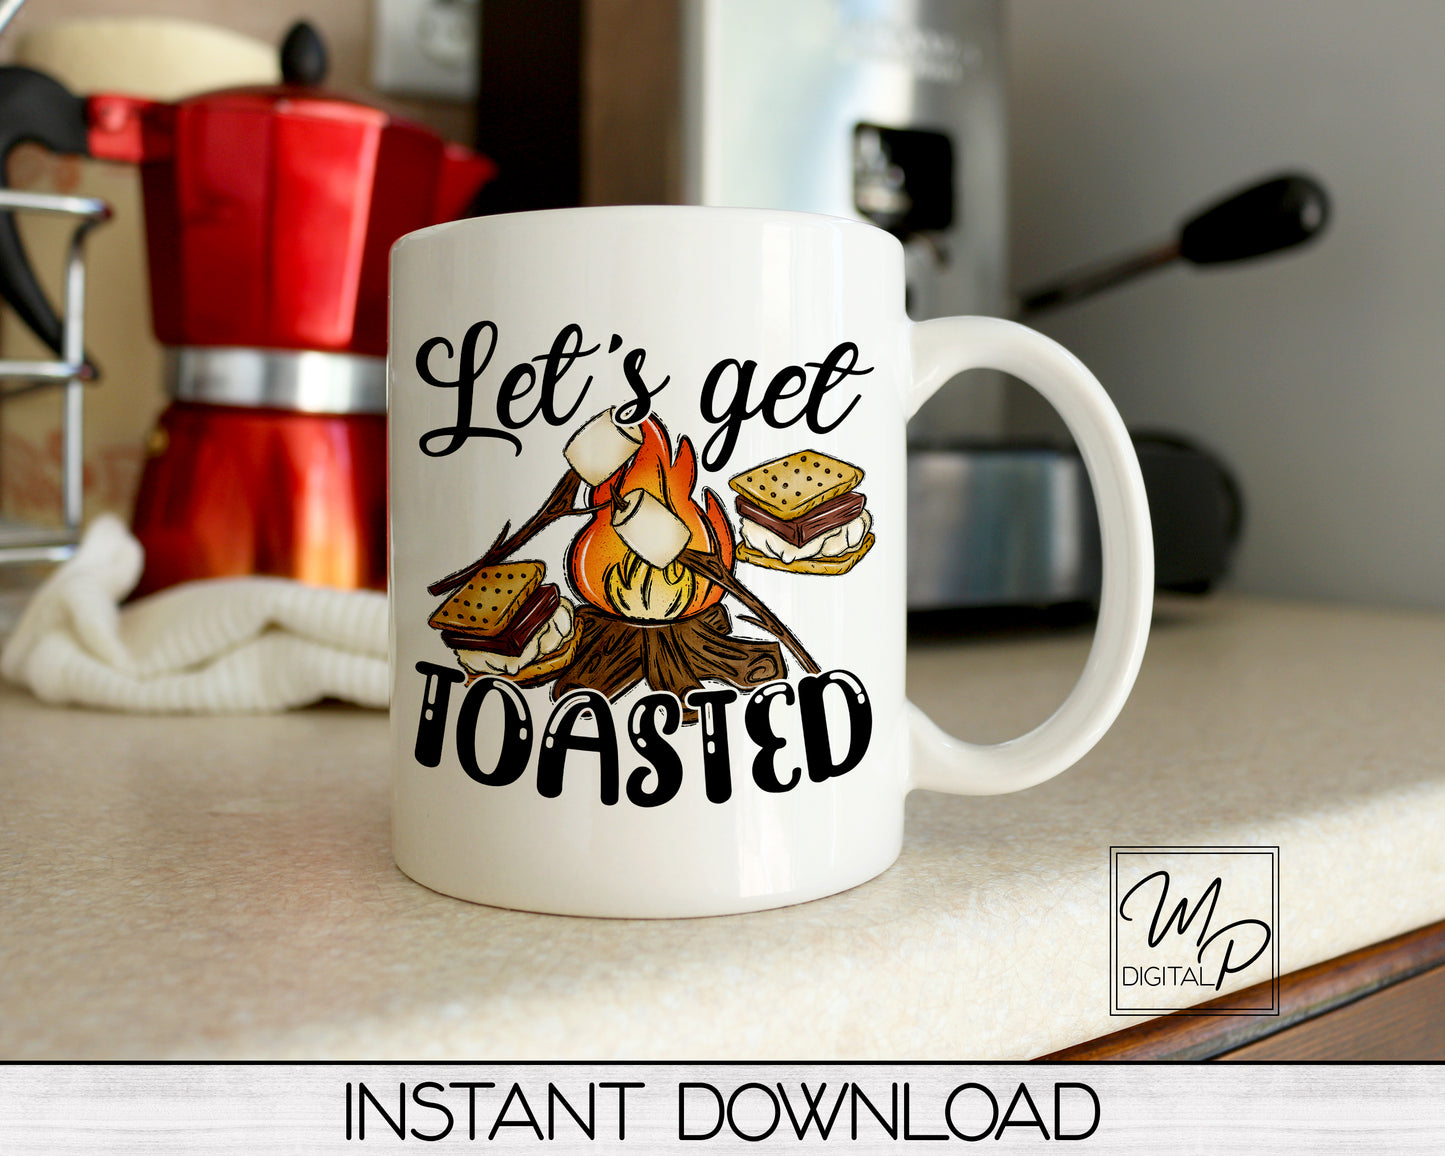 Let's Get Toasted PNG Sublimation Design, S'mores, Campfire, Commercial Use